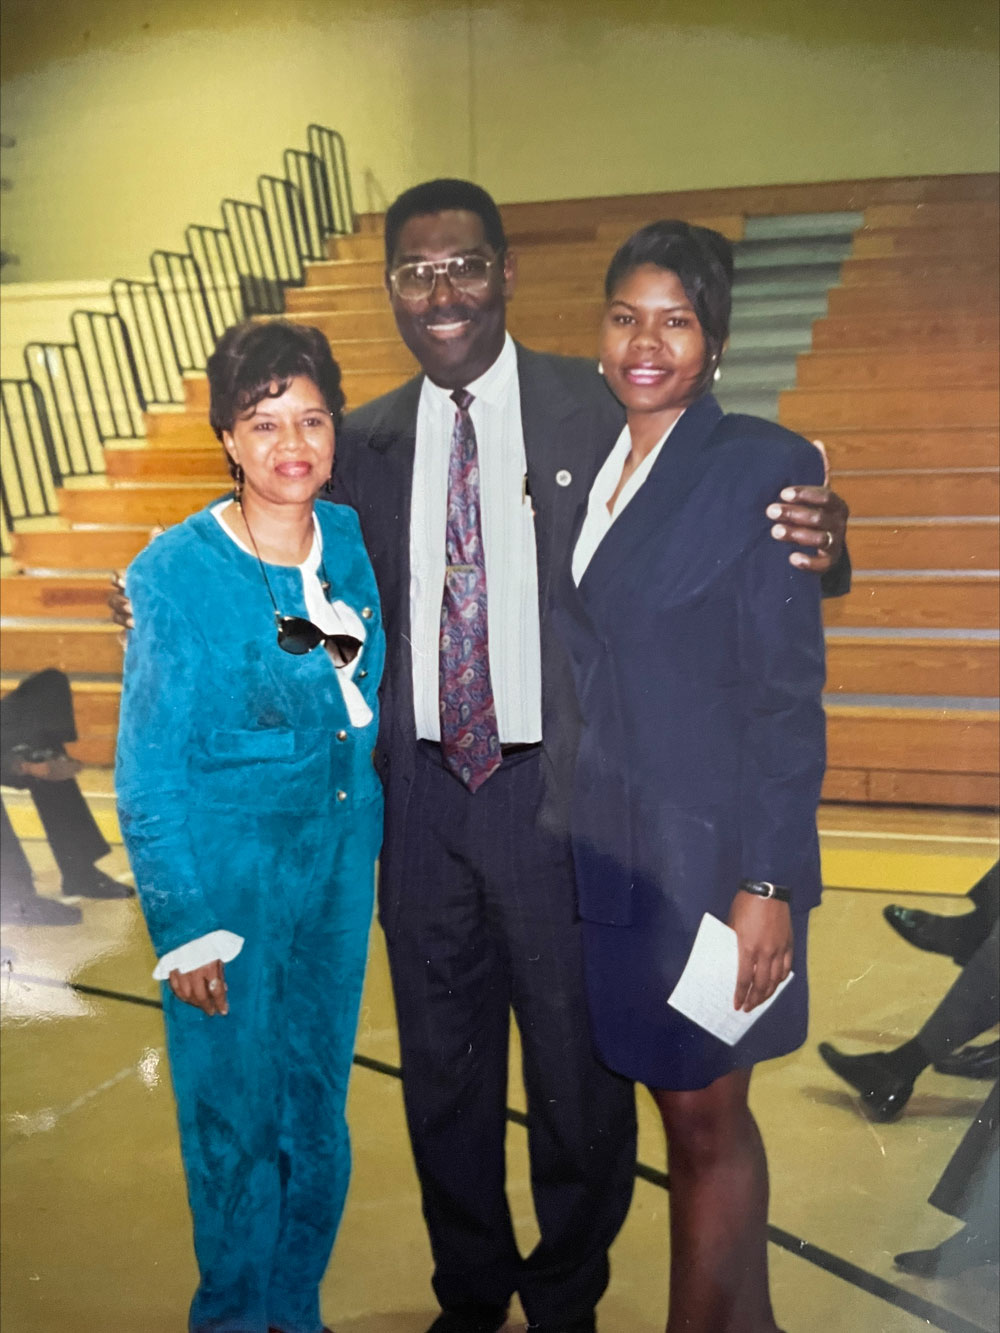 Dr. Caree Jackson-Cotwright as a teenager with her parents Mr. & Mrs. Ernest C. Jackson, Sr.